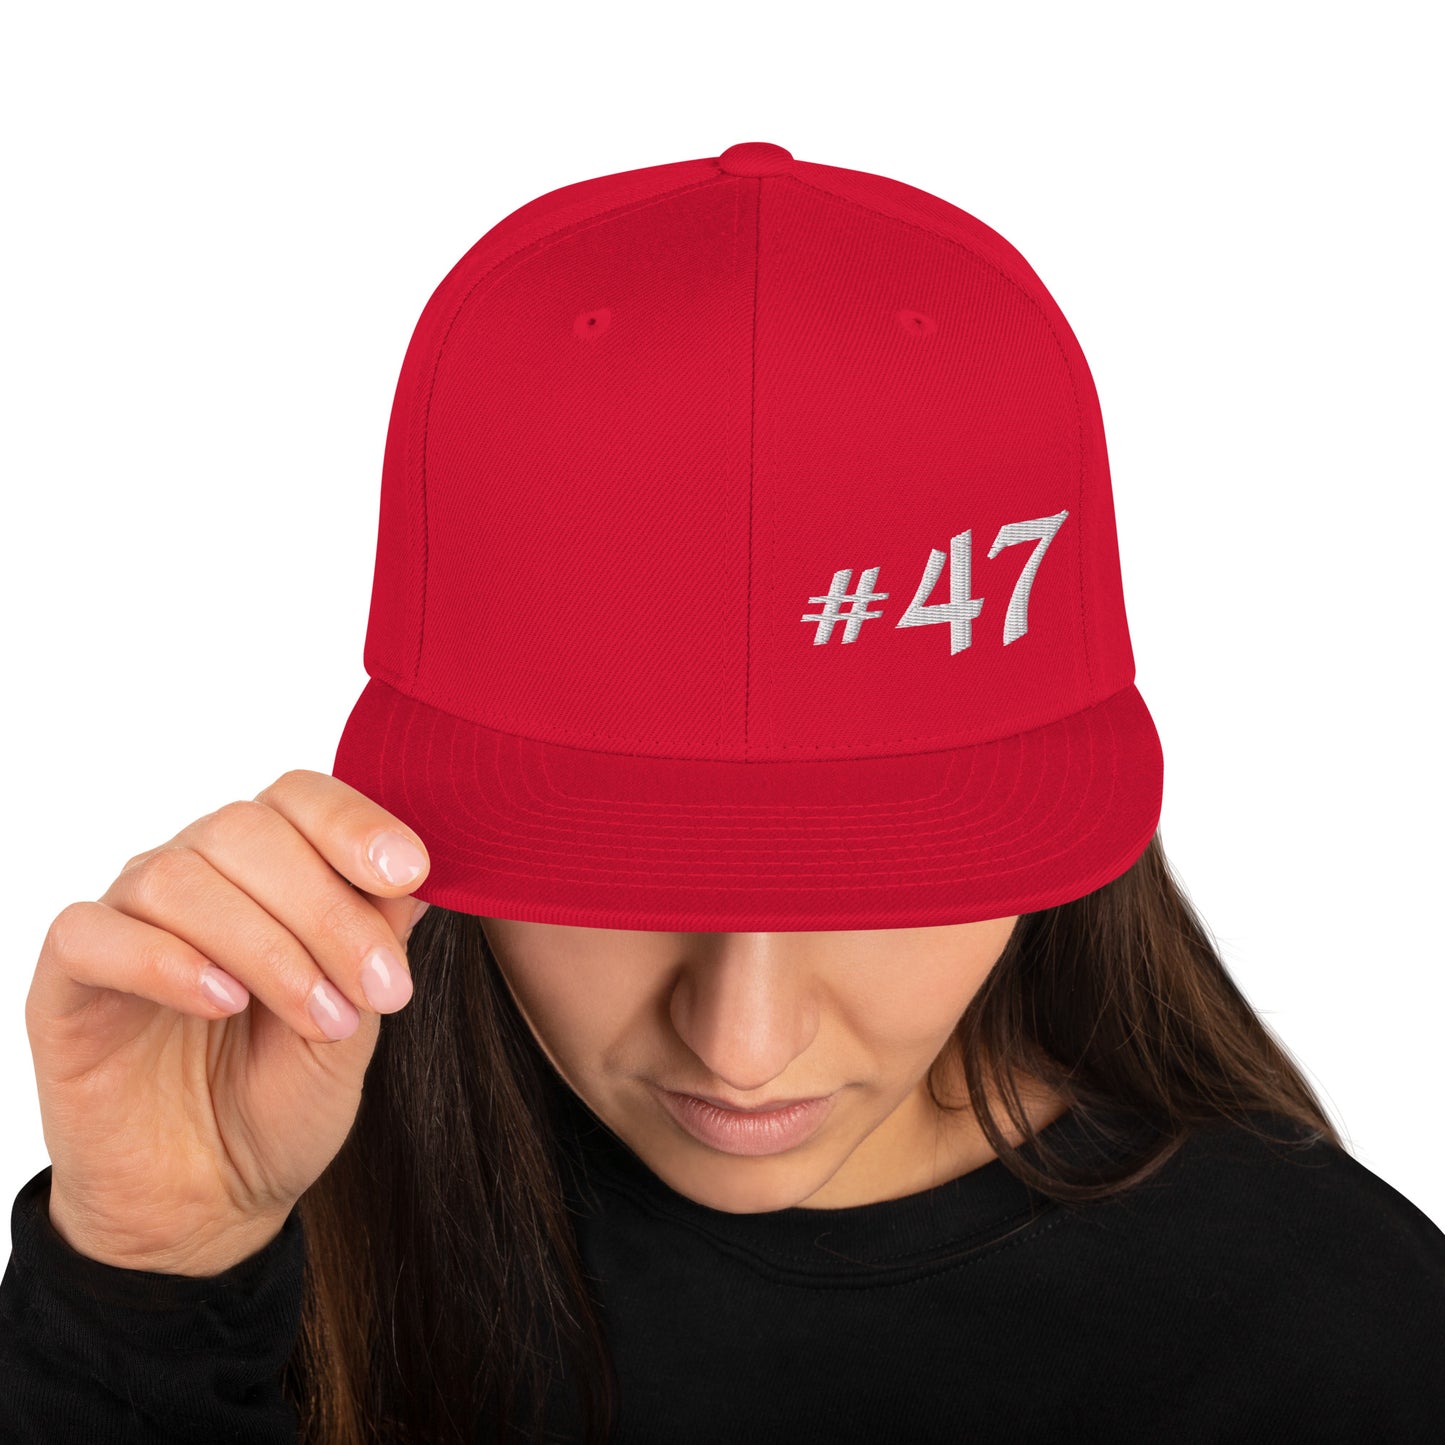 #47 Classic Snapback "Style A" Hat